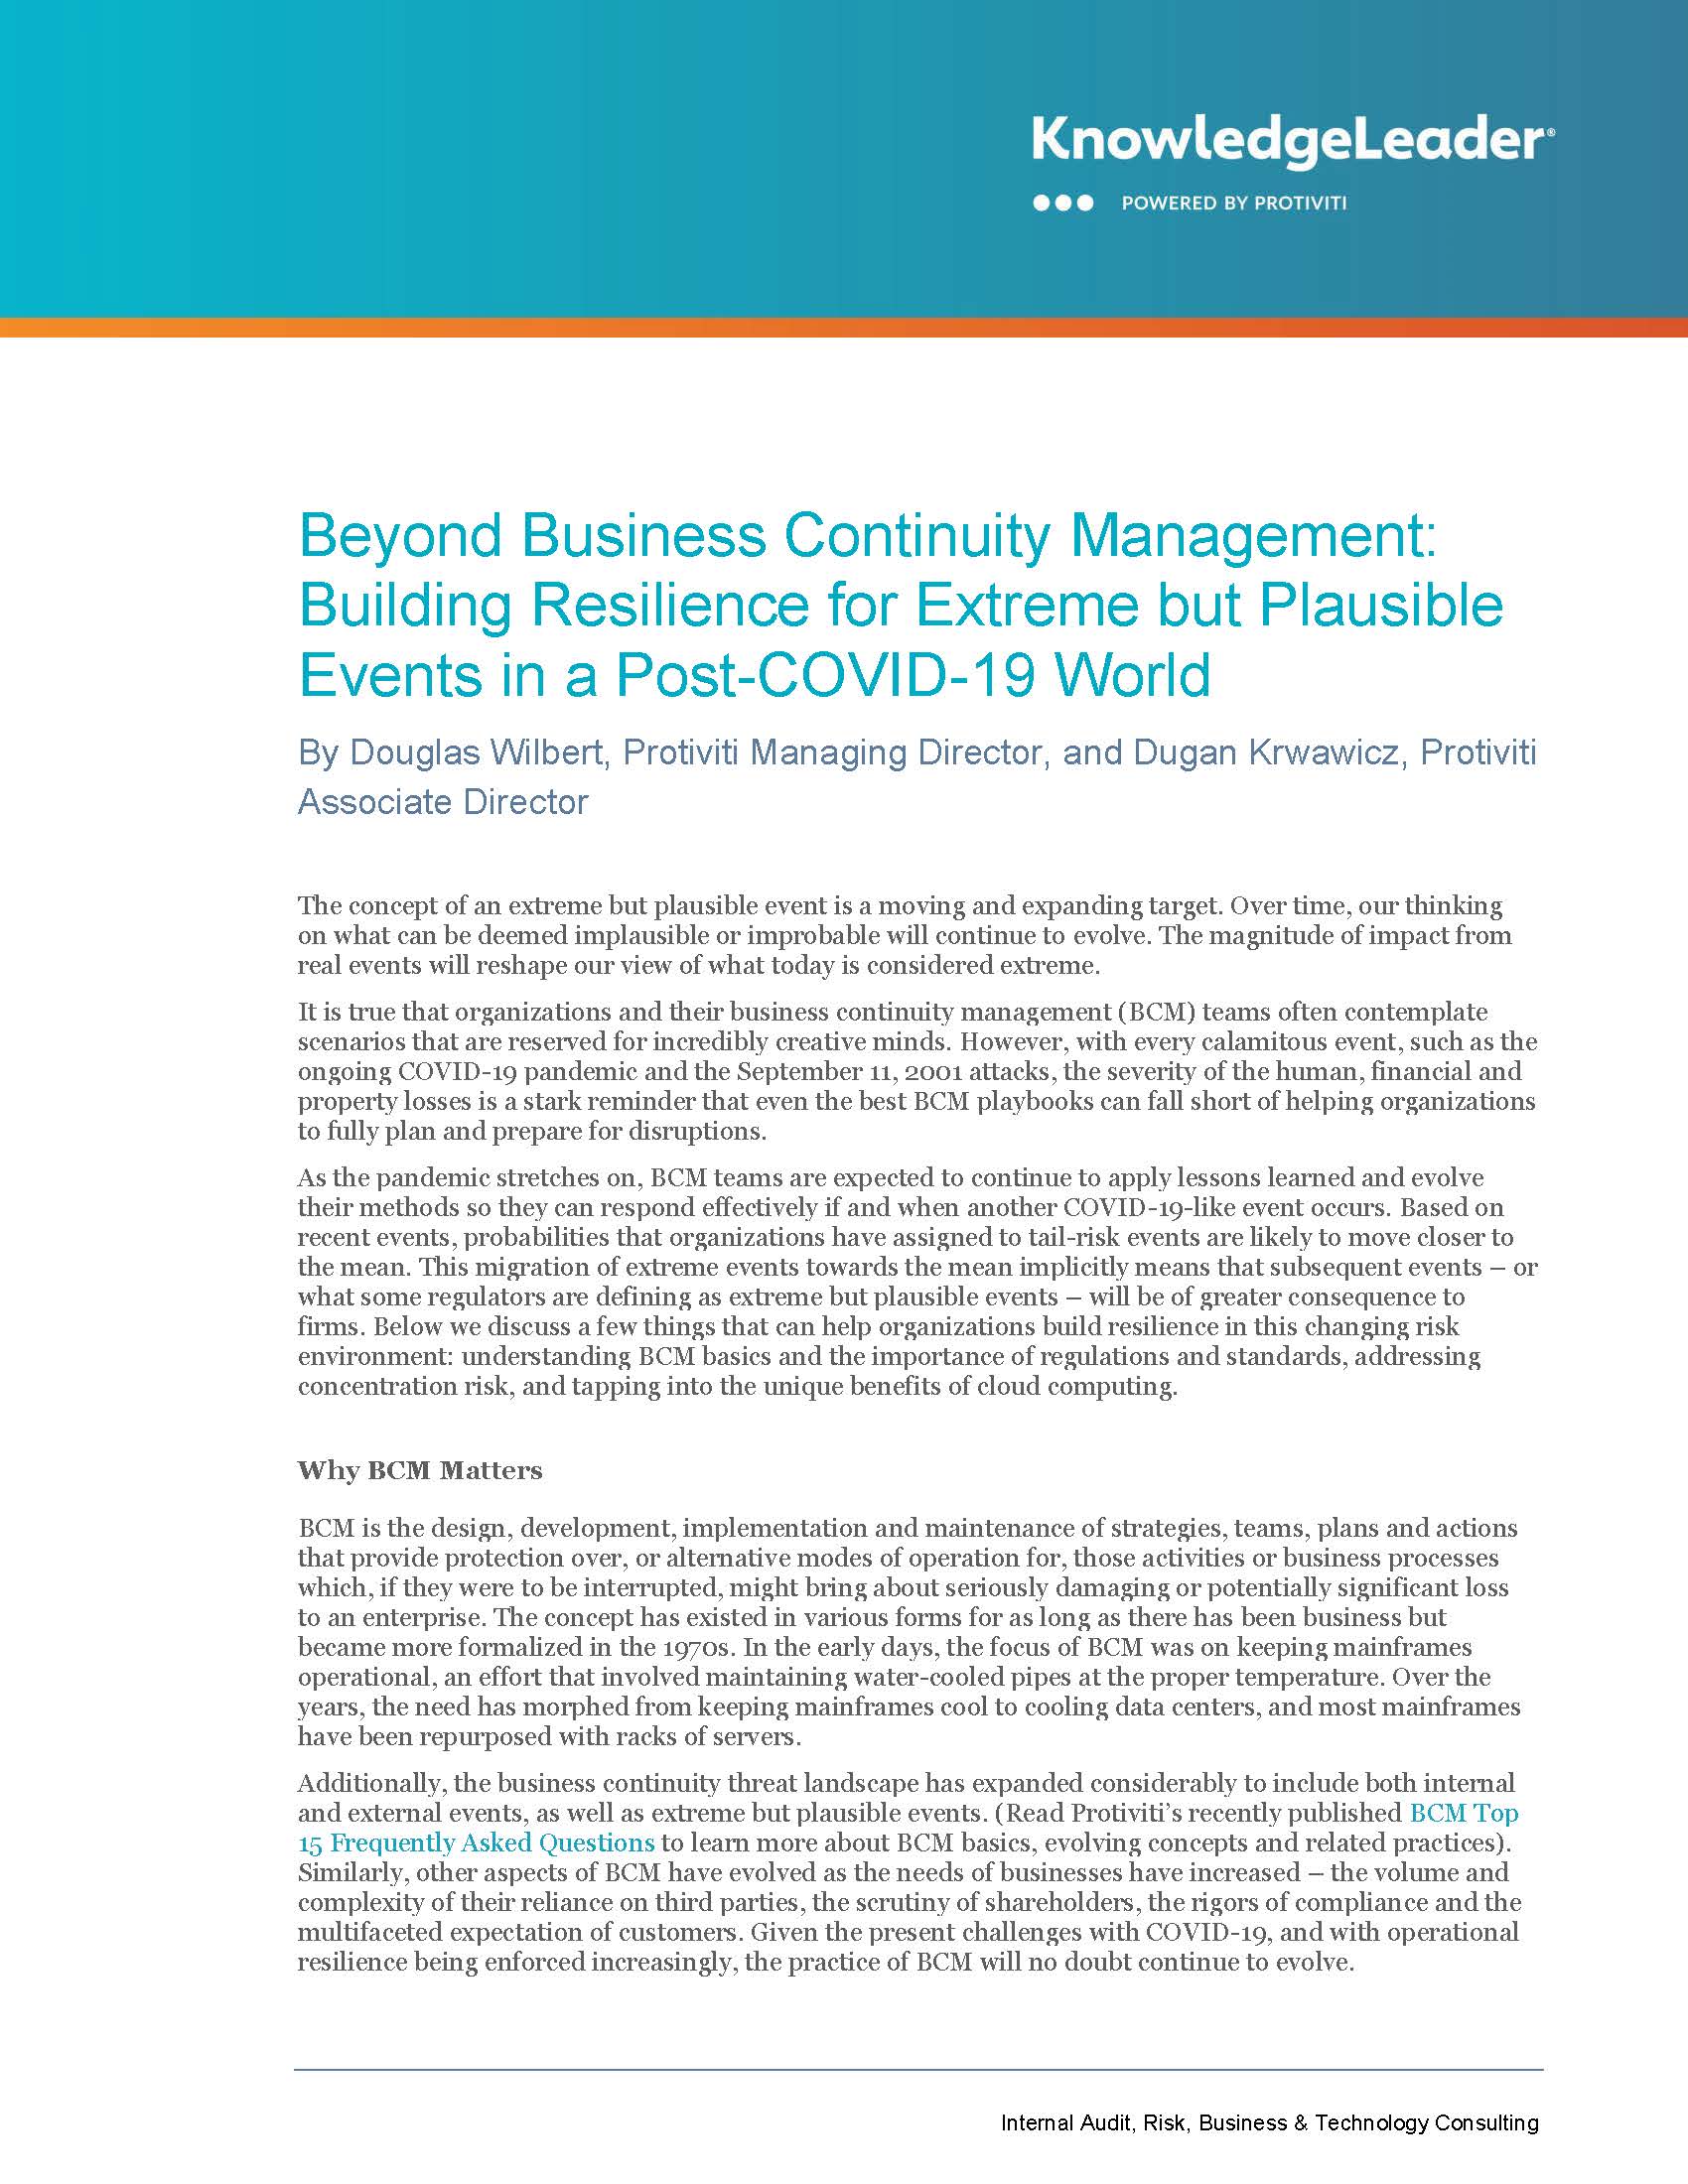 Screenshot of the first page of Beyond Business Continuity Management Building Resilience for Extreme but Plausible Events in a Post-COVID-19 World